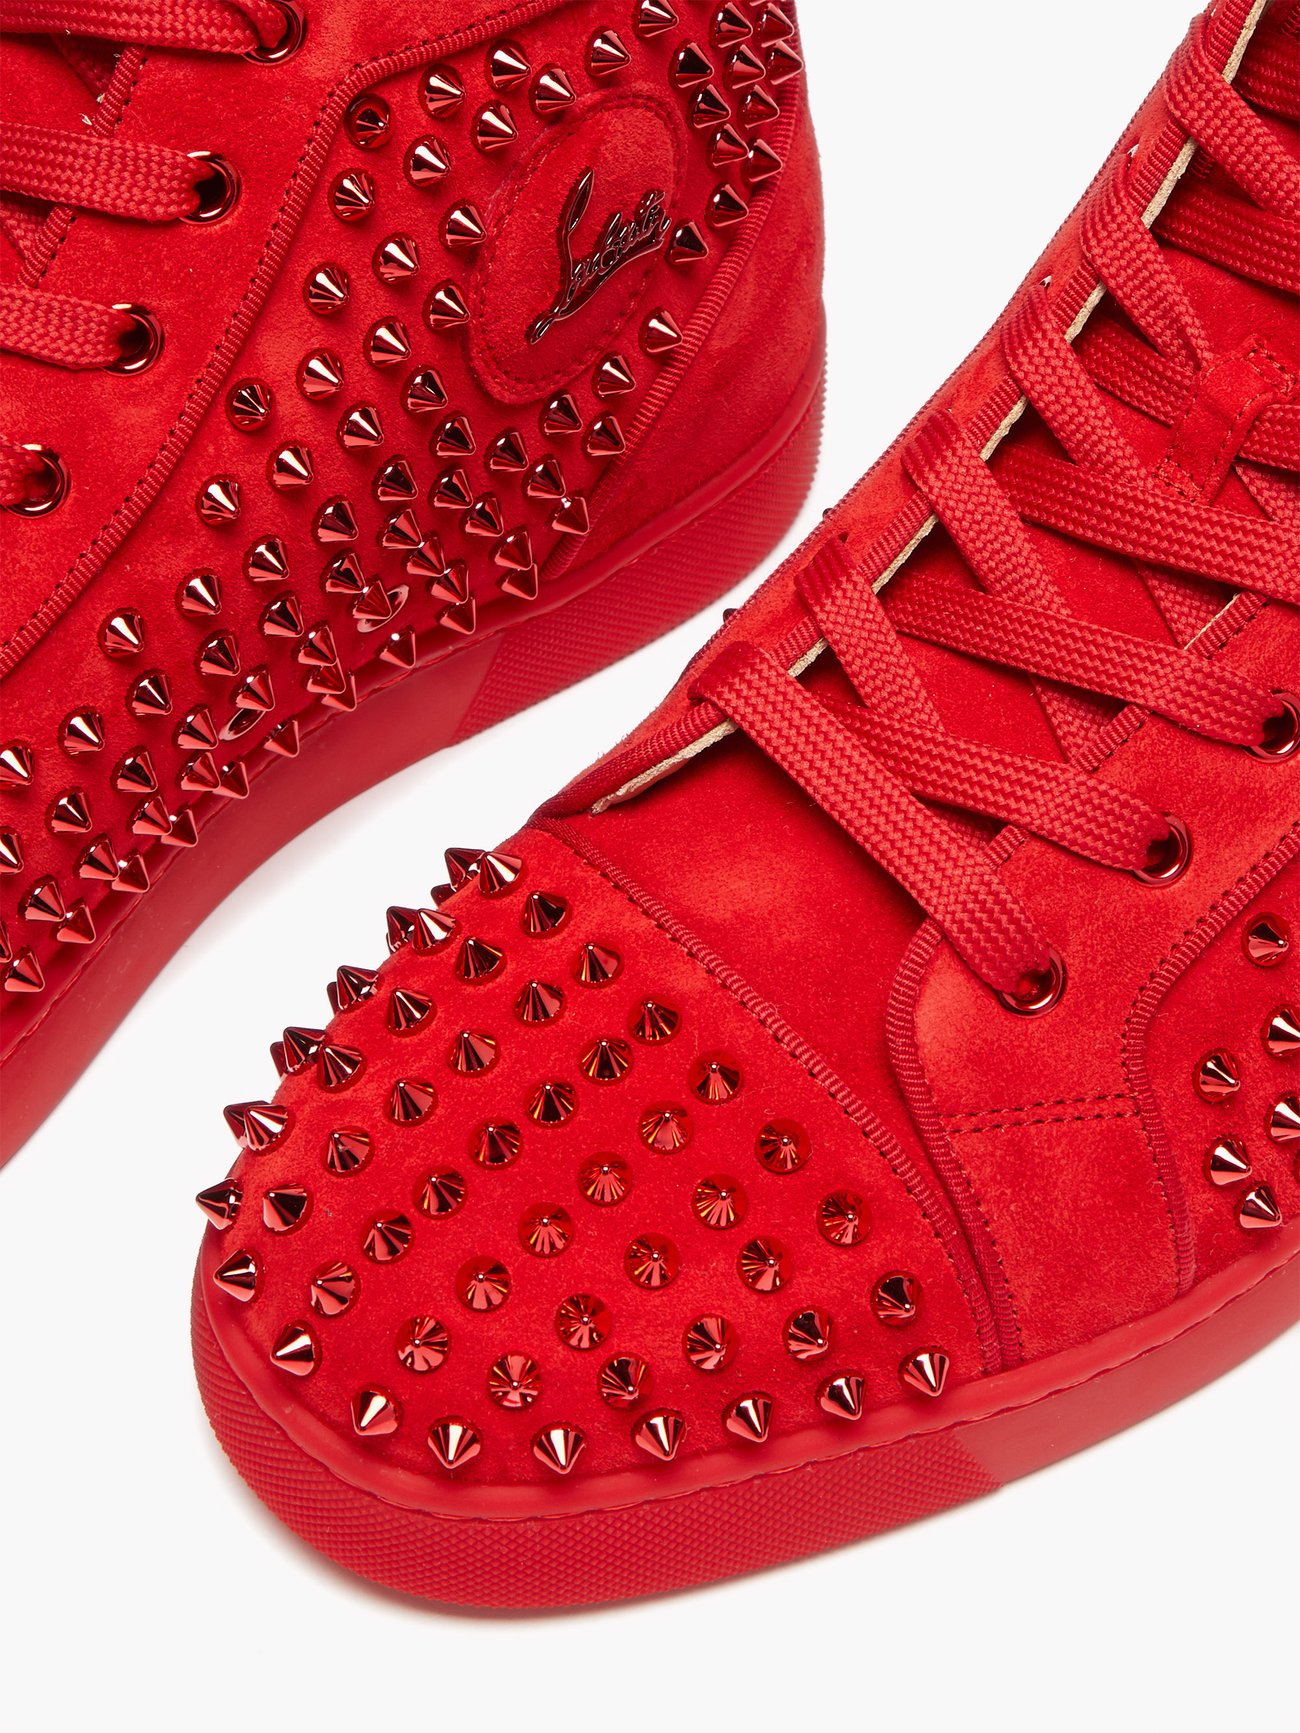 Christian Louboutin Louis Spike Suede High Top Sneaker in Red for